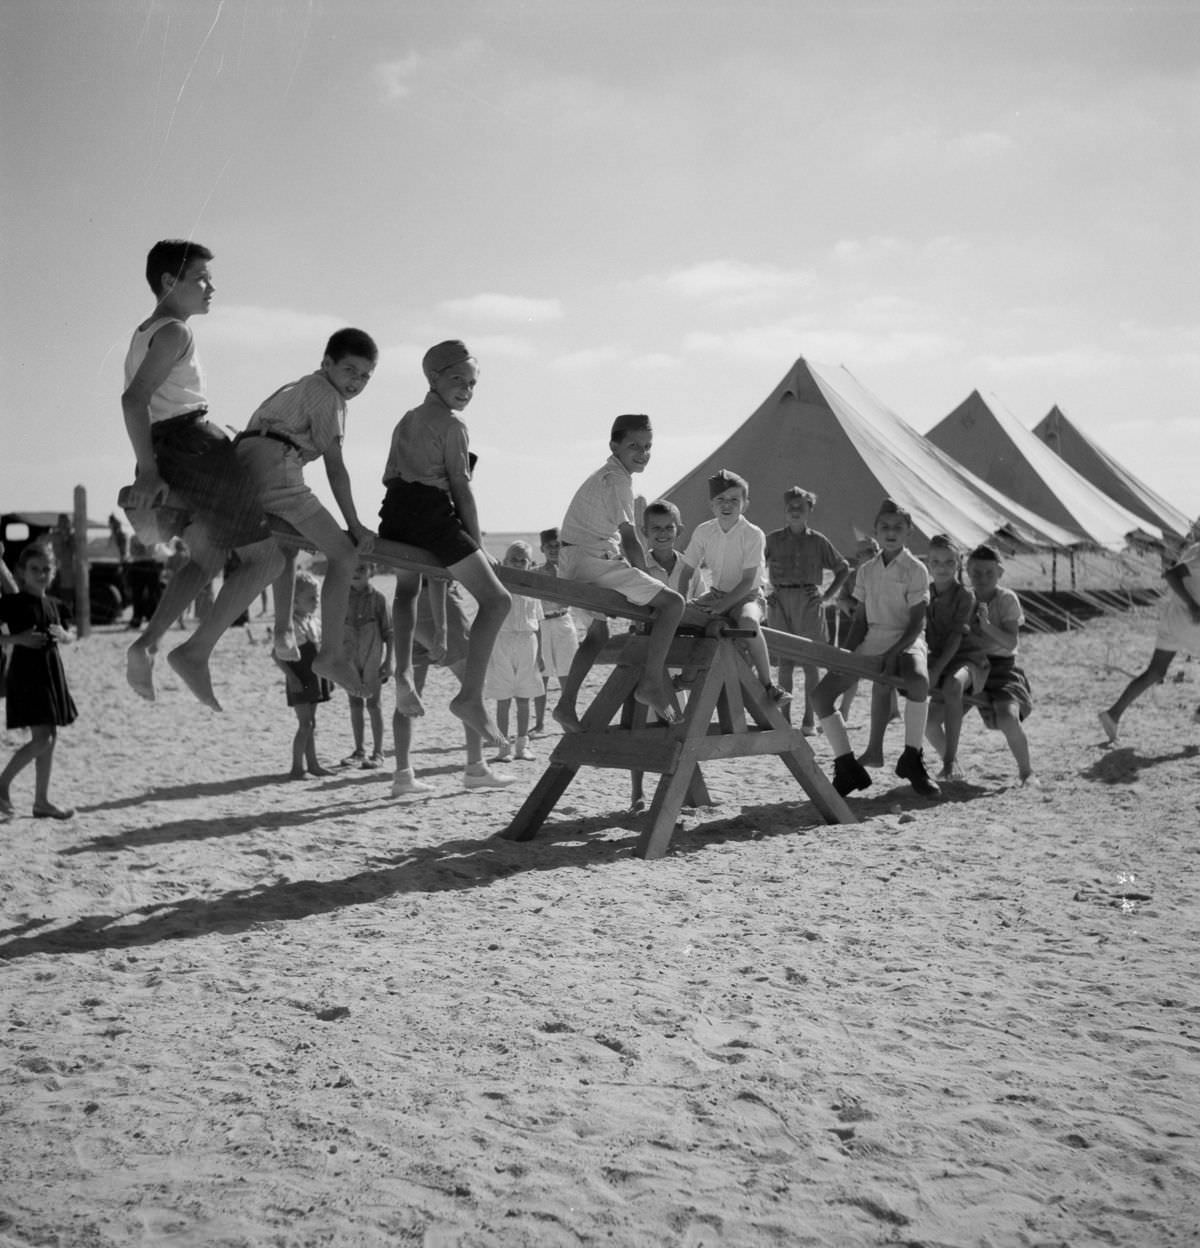 A Glimpse into the Lives of War Refugees: The El Shatt Camps in Egypt during WWII